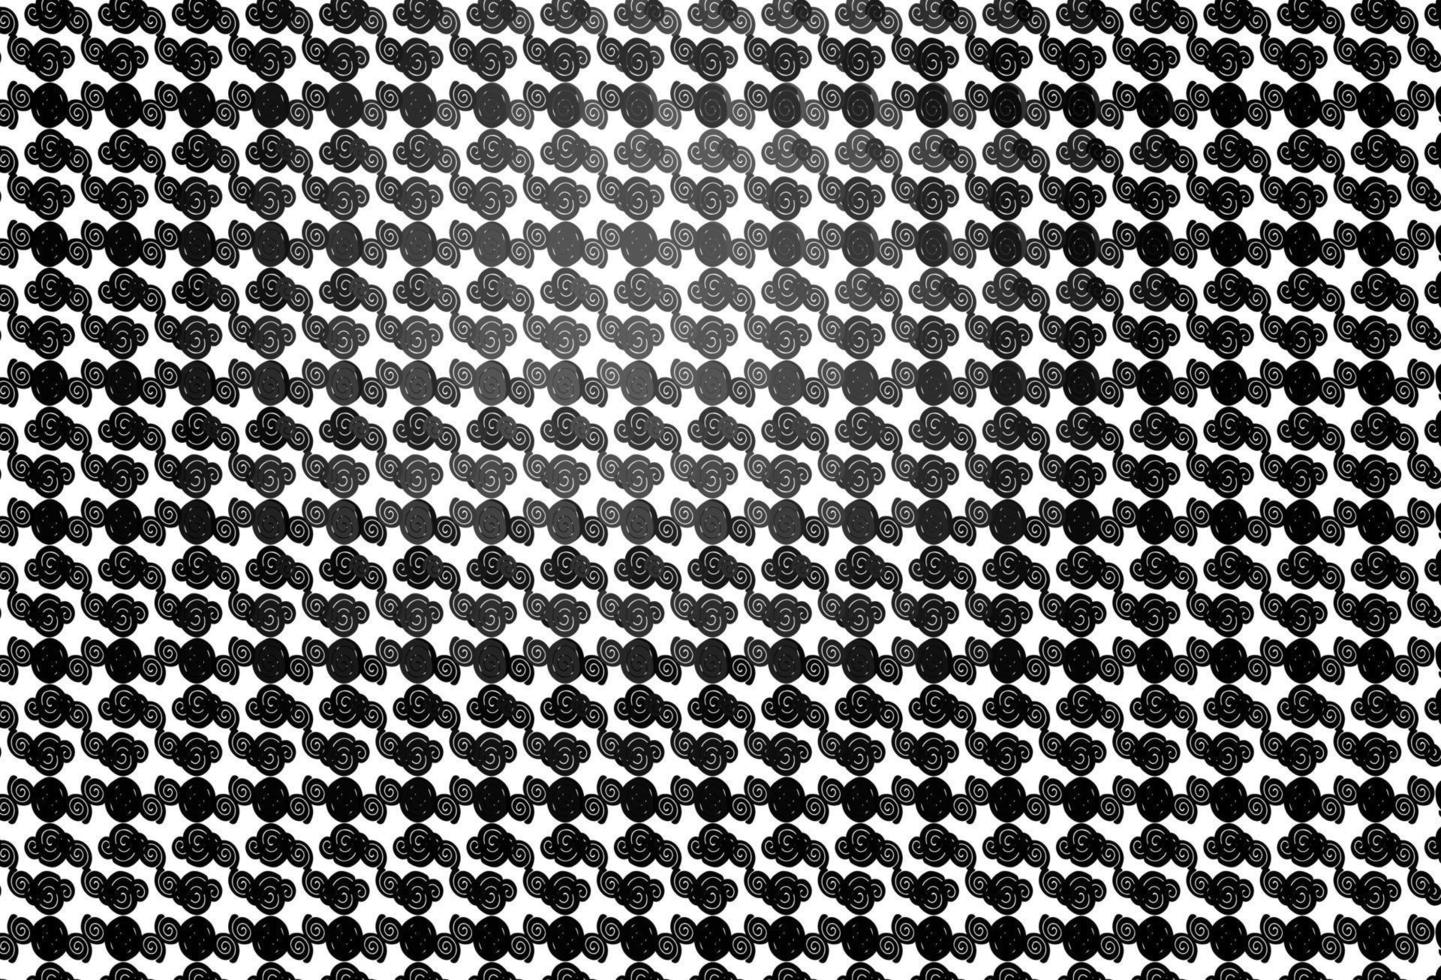 Light Black vector pattern with lines, ovals.